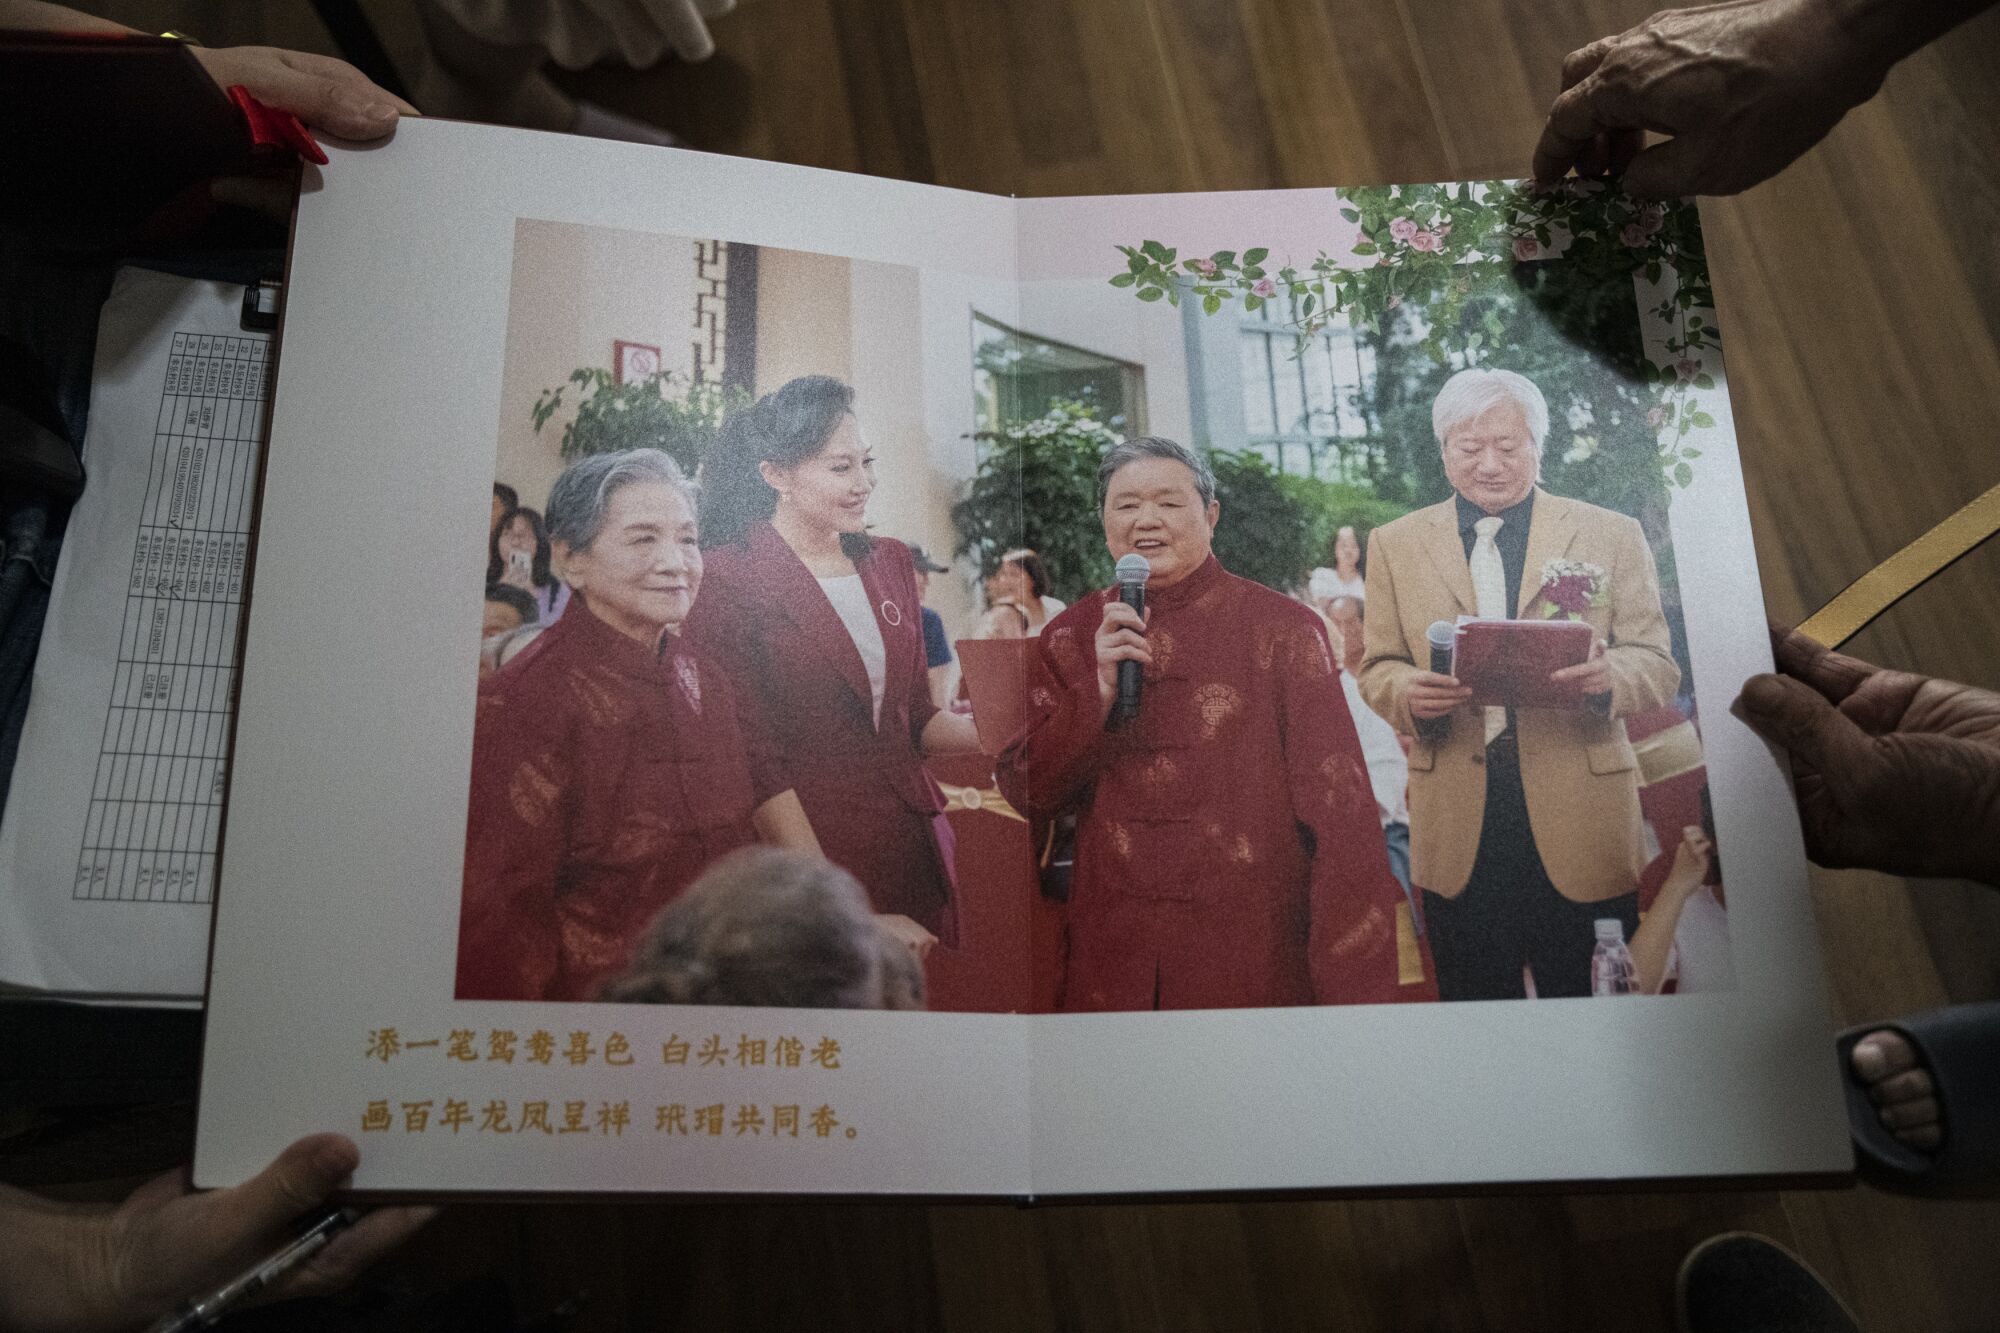 In October 2019, Grandpa Xu and Grandma Wu had been celebrated in a city ceremony for the the nation's 70th anniversary, which coincided with their 70th wedding anniversary. In January 2020, seven members of their family fell sick after having dinner together, unaware of the coronavirus spreading in Wuhan. Two of them died.